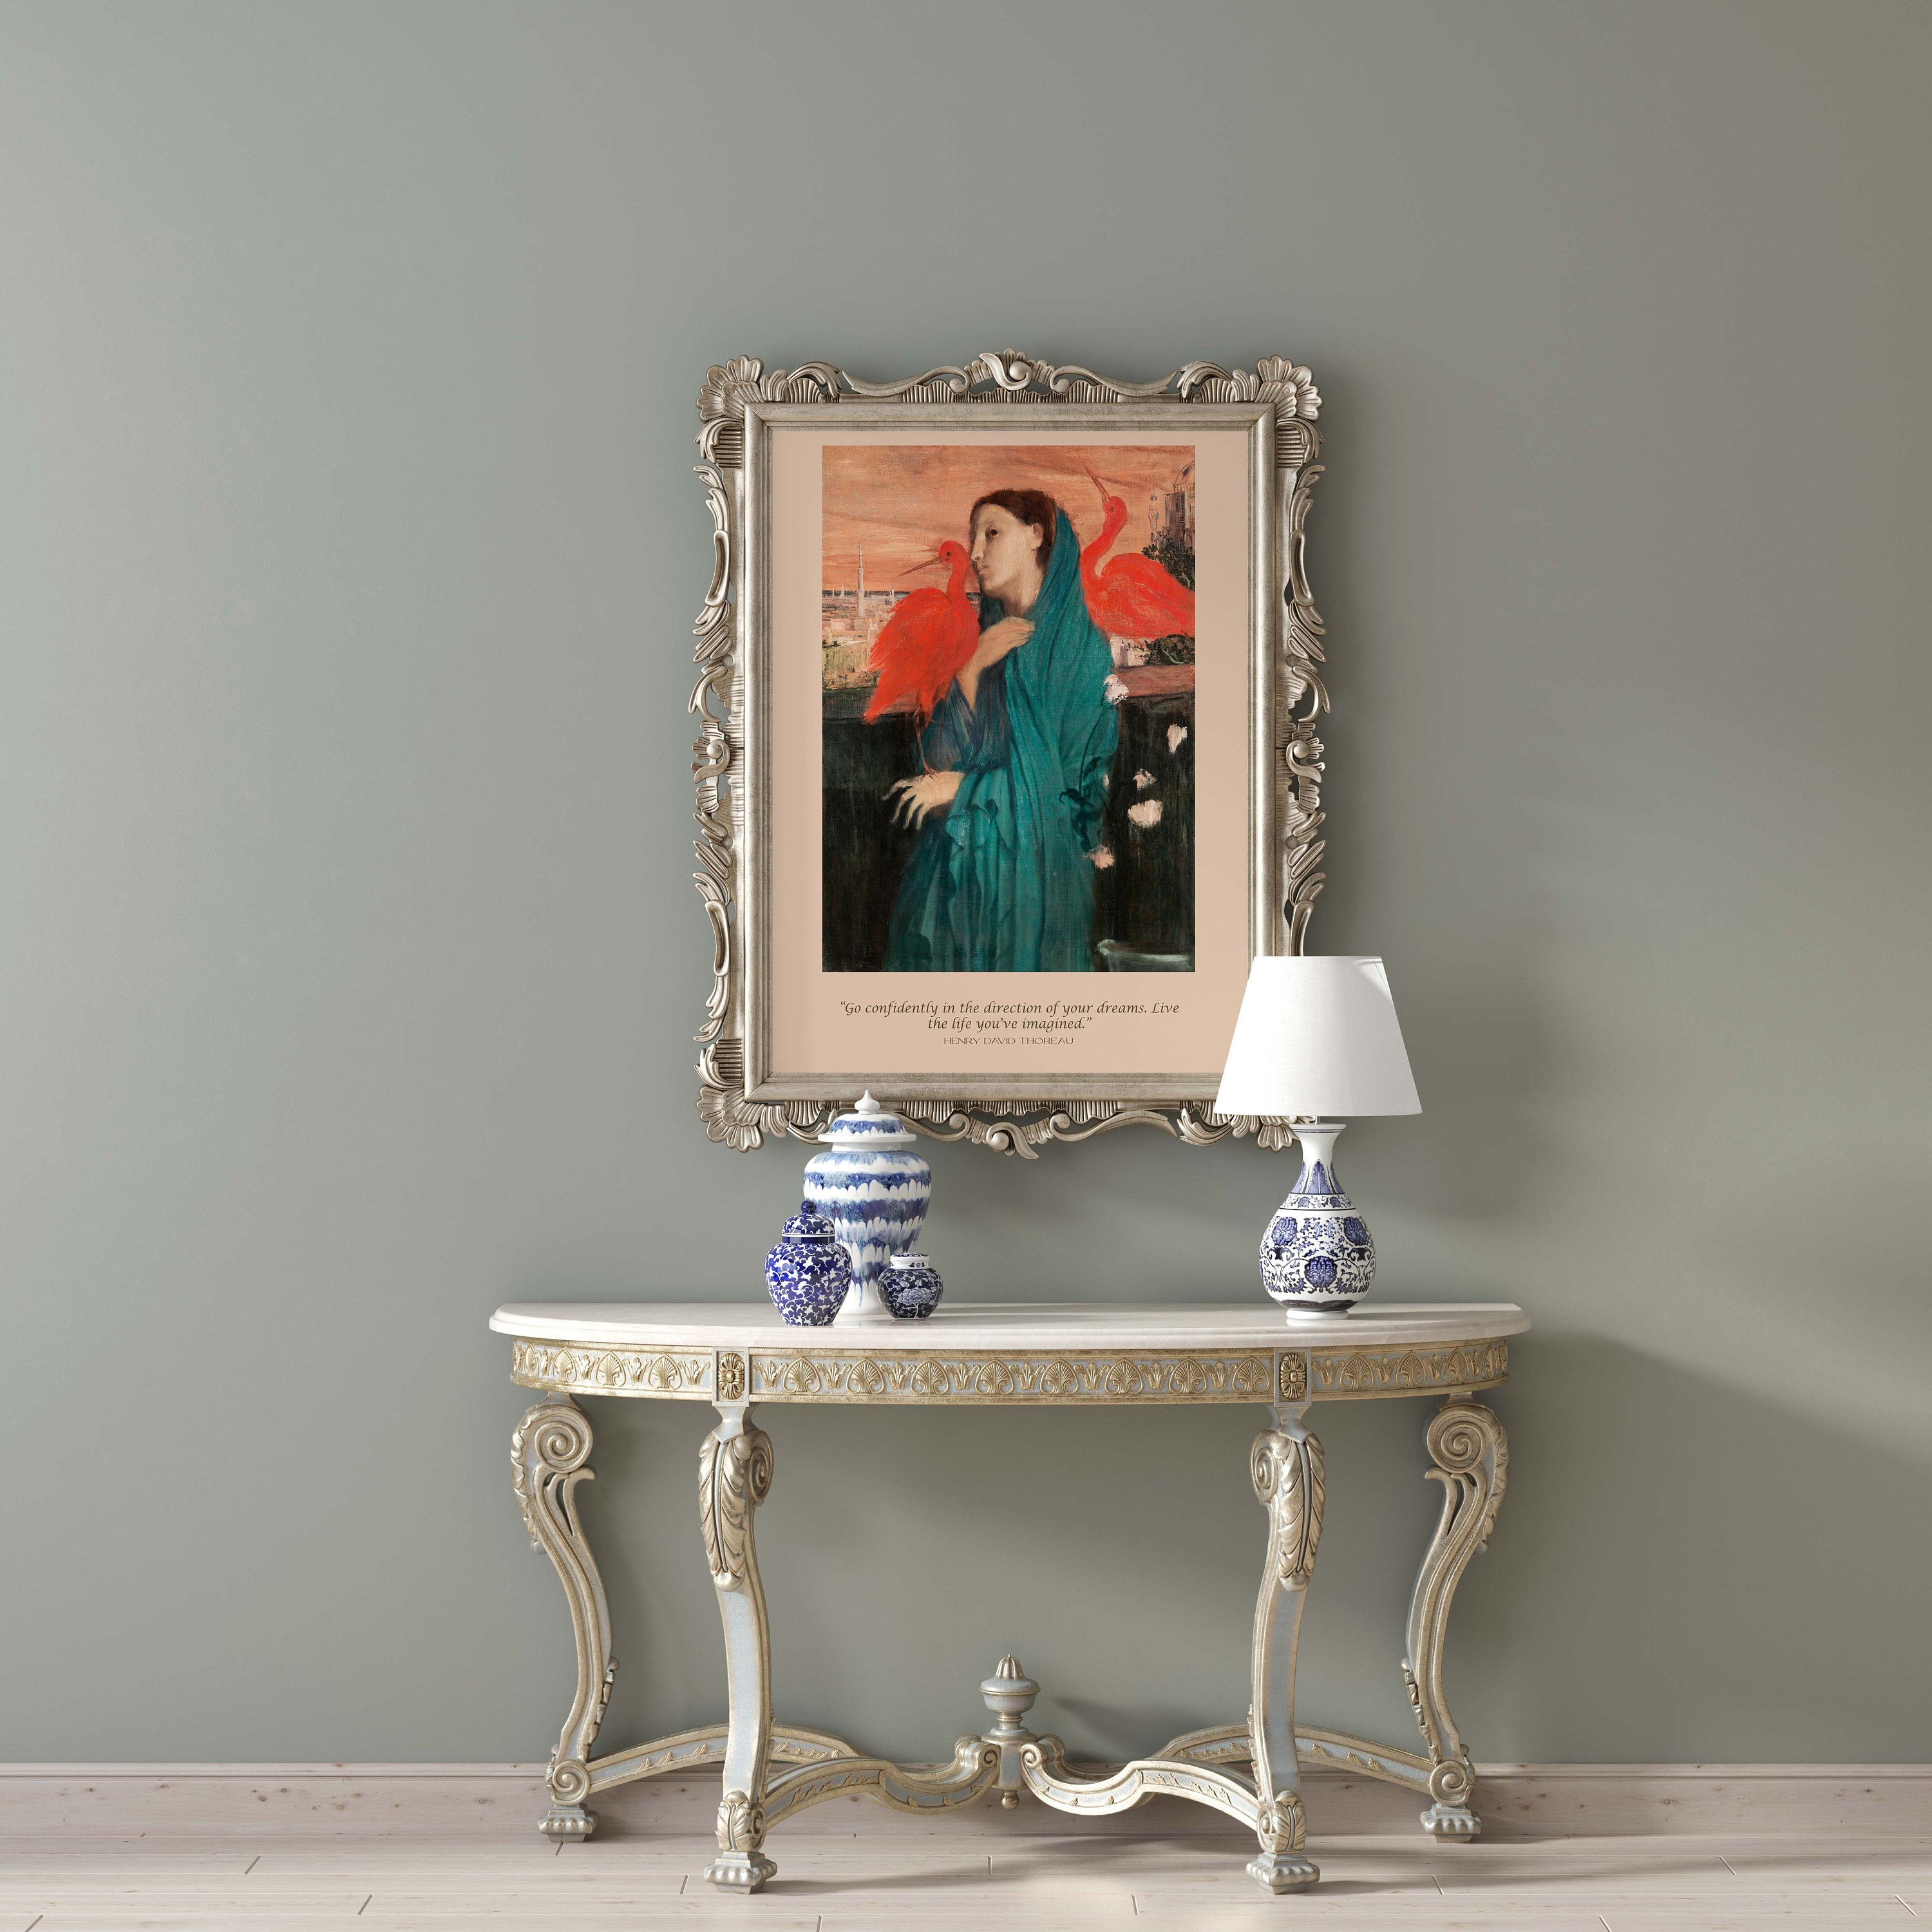 Henry David Thoreau and Edgar Degas Art Print Go Confidently In The Direction Of Your Dreams